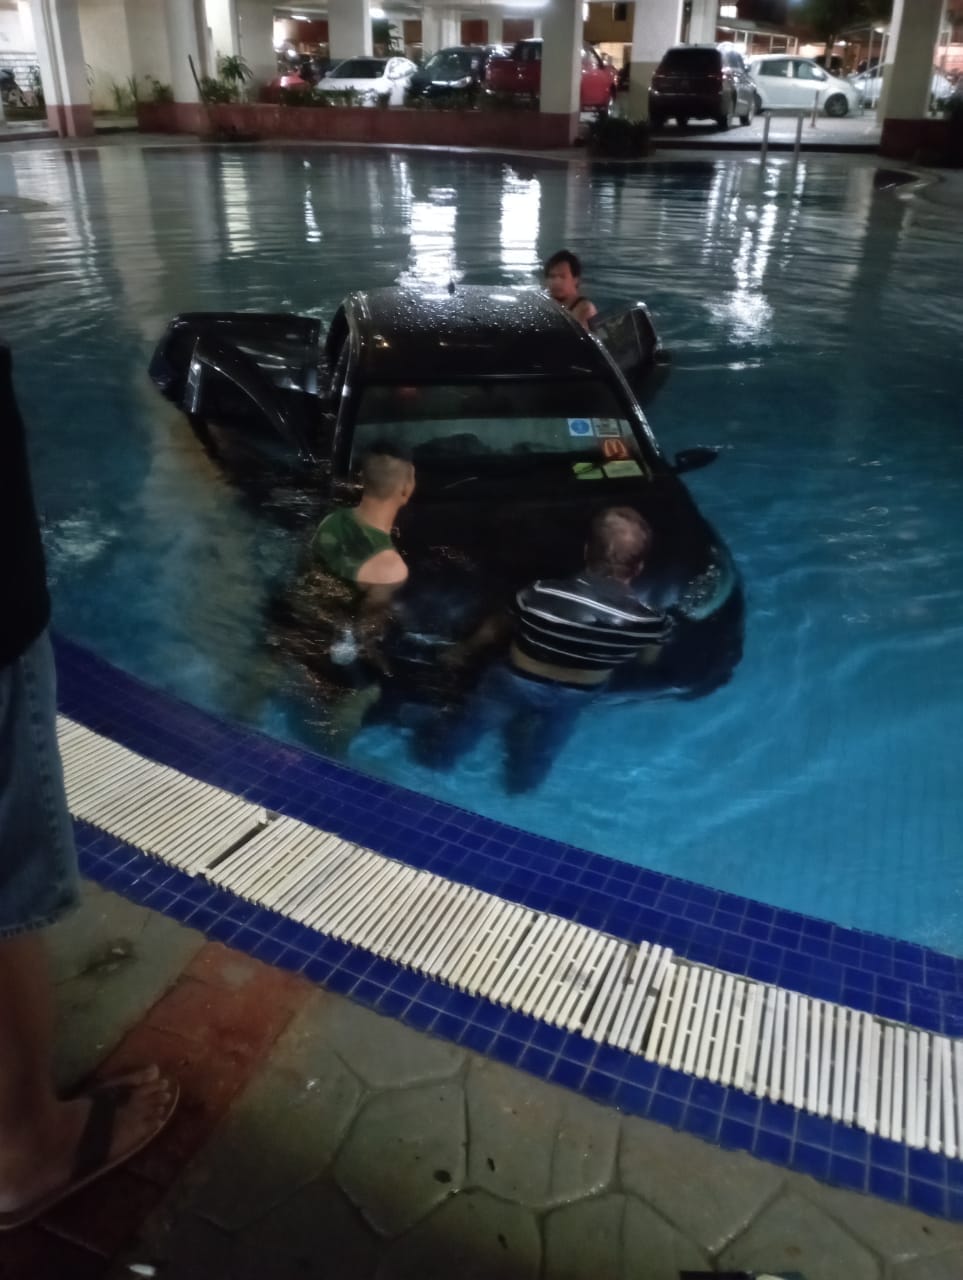 Man drives his car into kl condo swimming pool due to poor visibility3